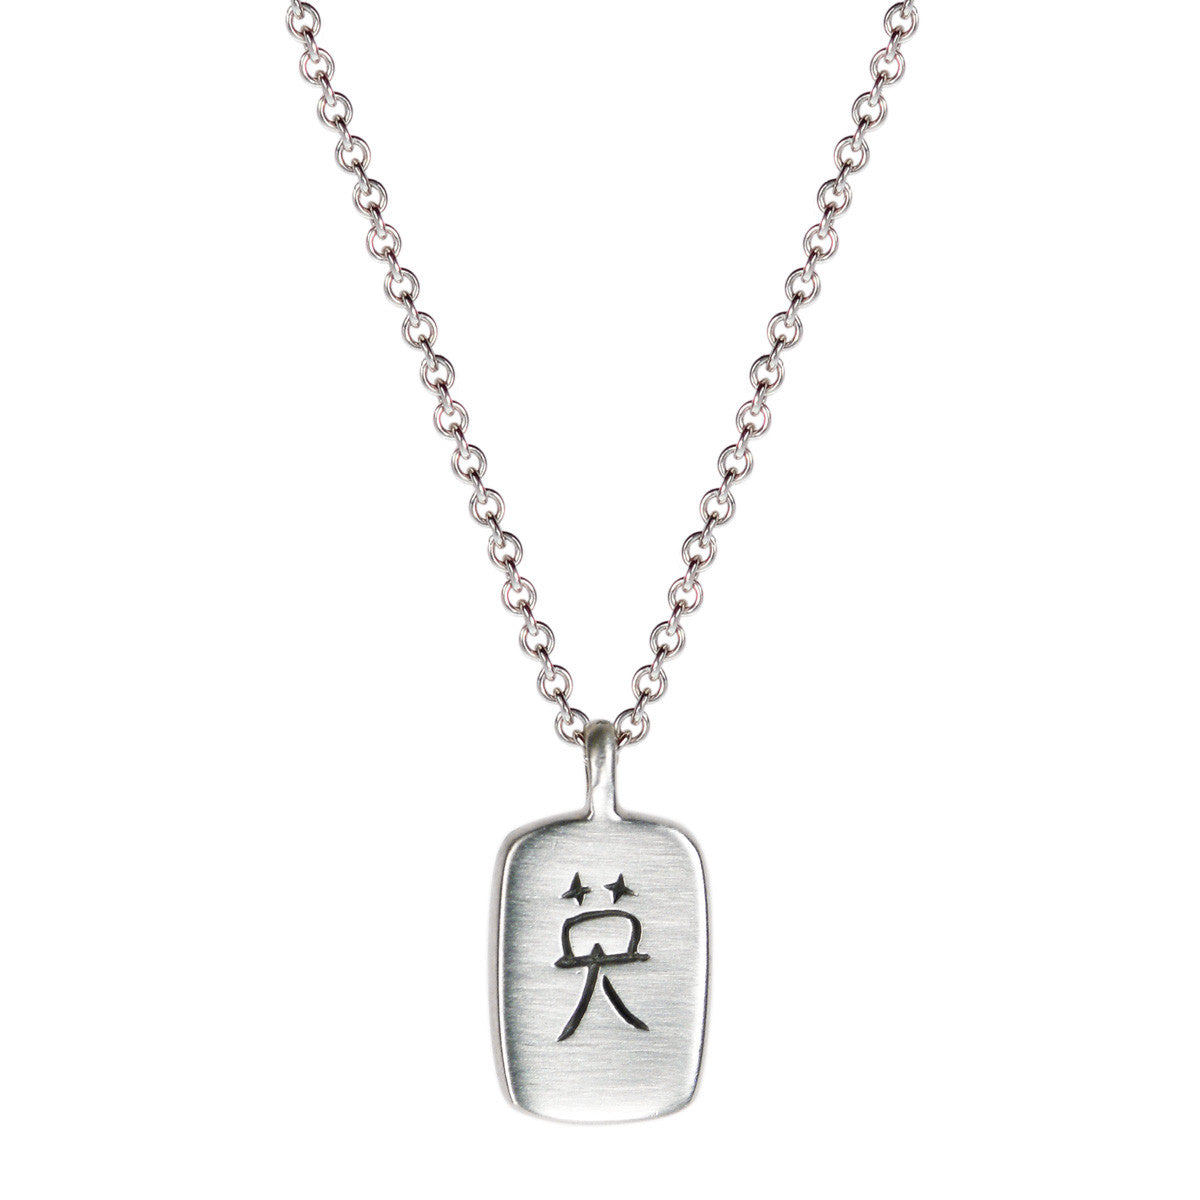 Men's Sterling Silver Courage Pendant